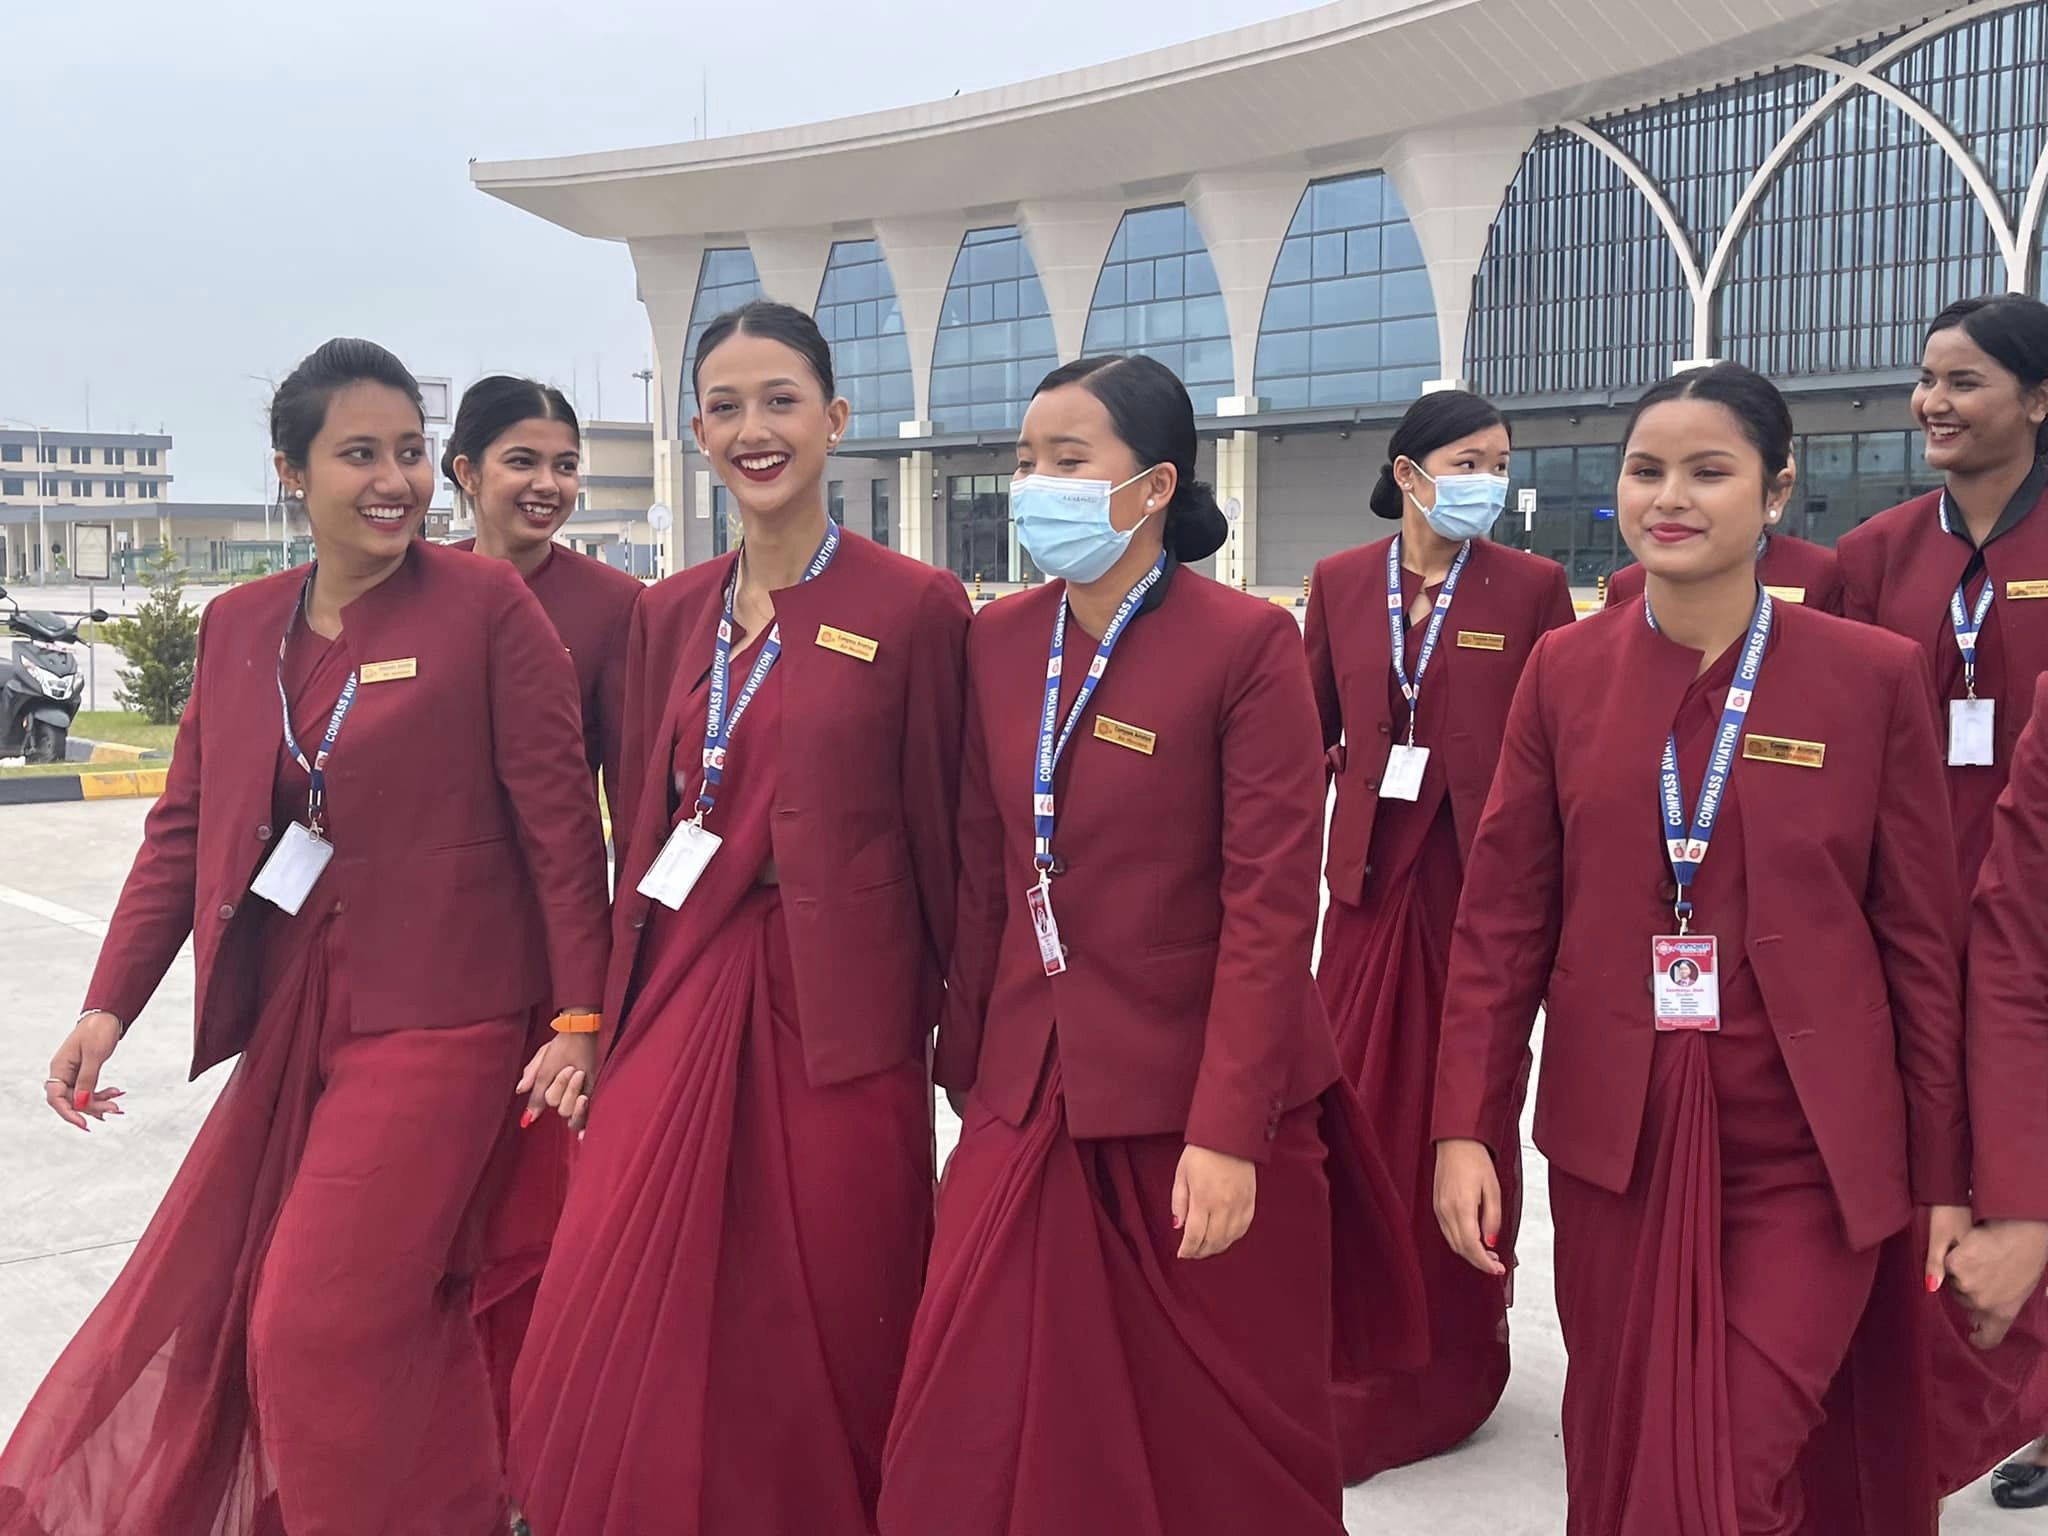 Air hostess assisting passengers with a friendly smile